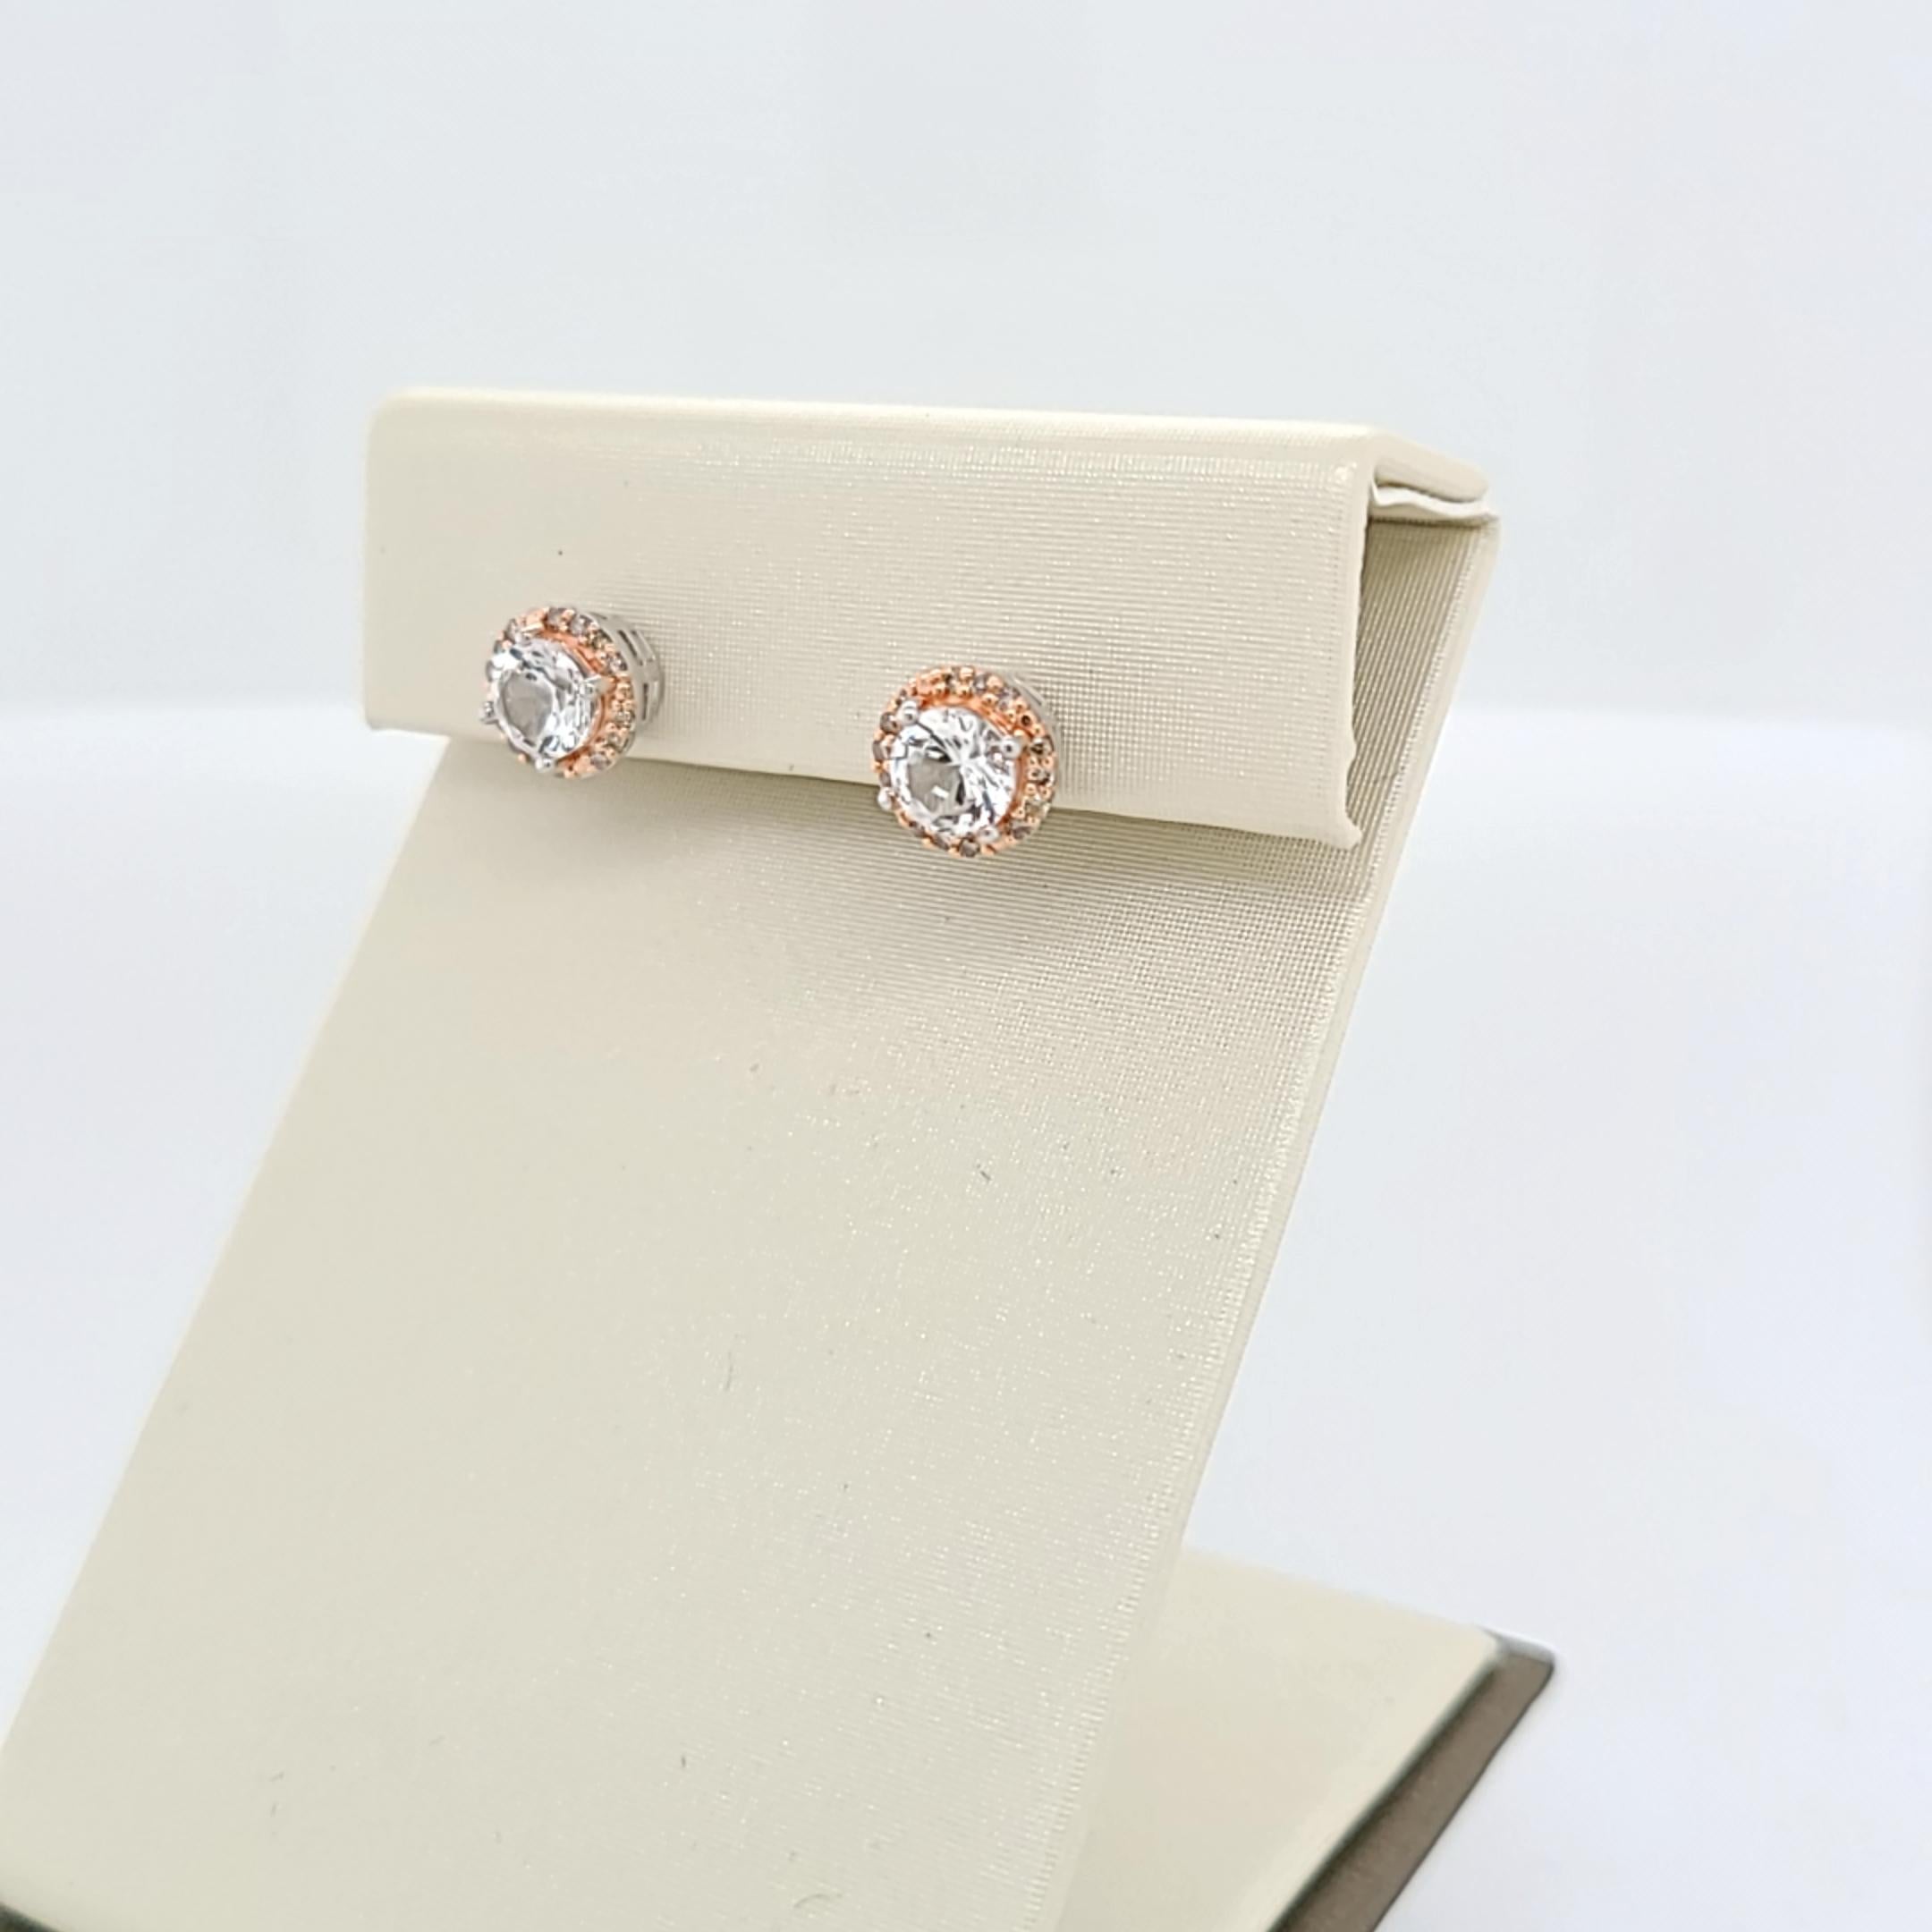 1 Carat Sized White Sapphire and Brown Diamond Halo Stud Earrings For ...